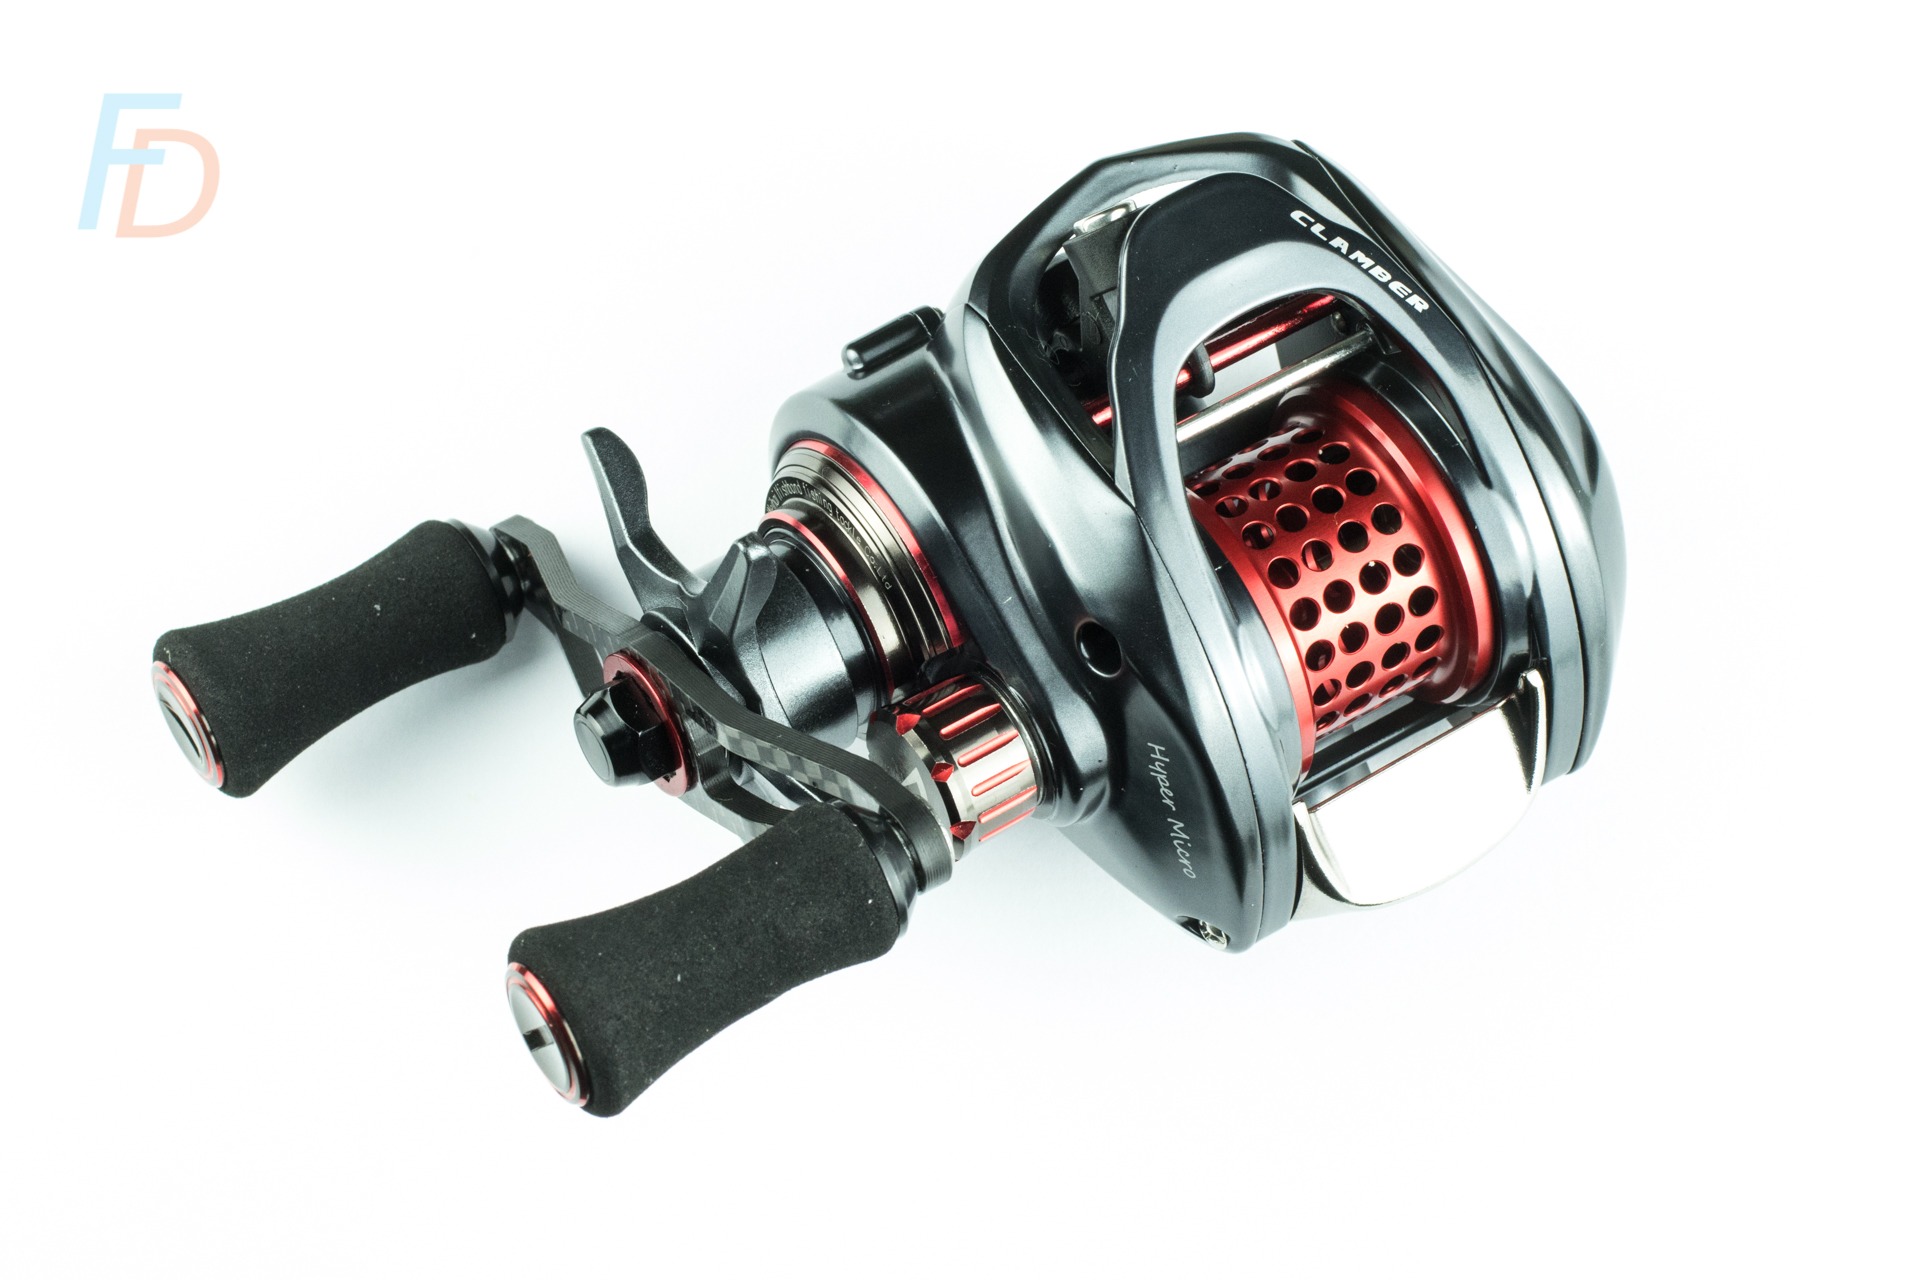 Fishband Clamber Hyper Micro CR-HM06 complete reel